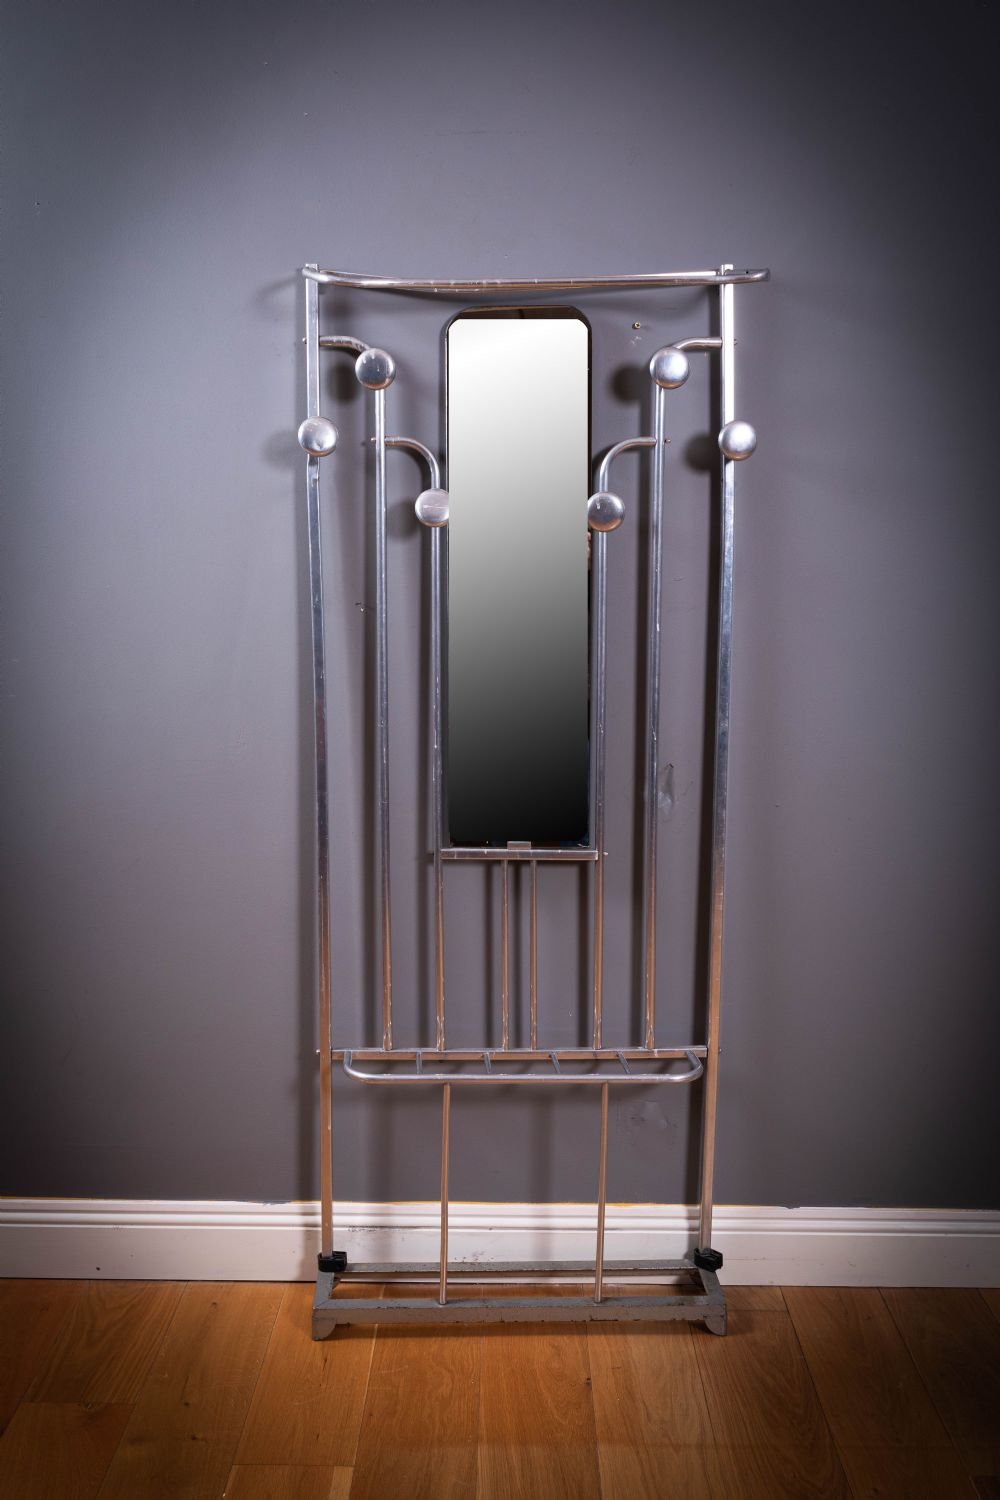 A METAL COAT STAND IN ART DECO STYLE, at deVeres Auctions